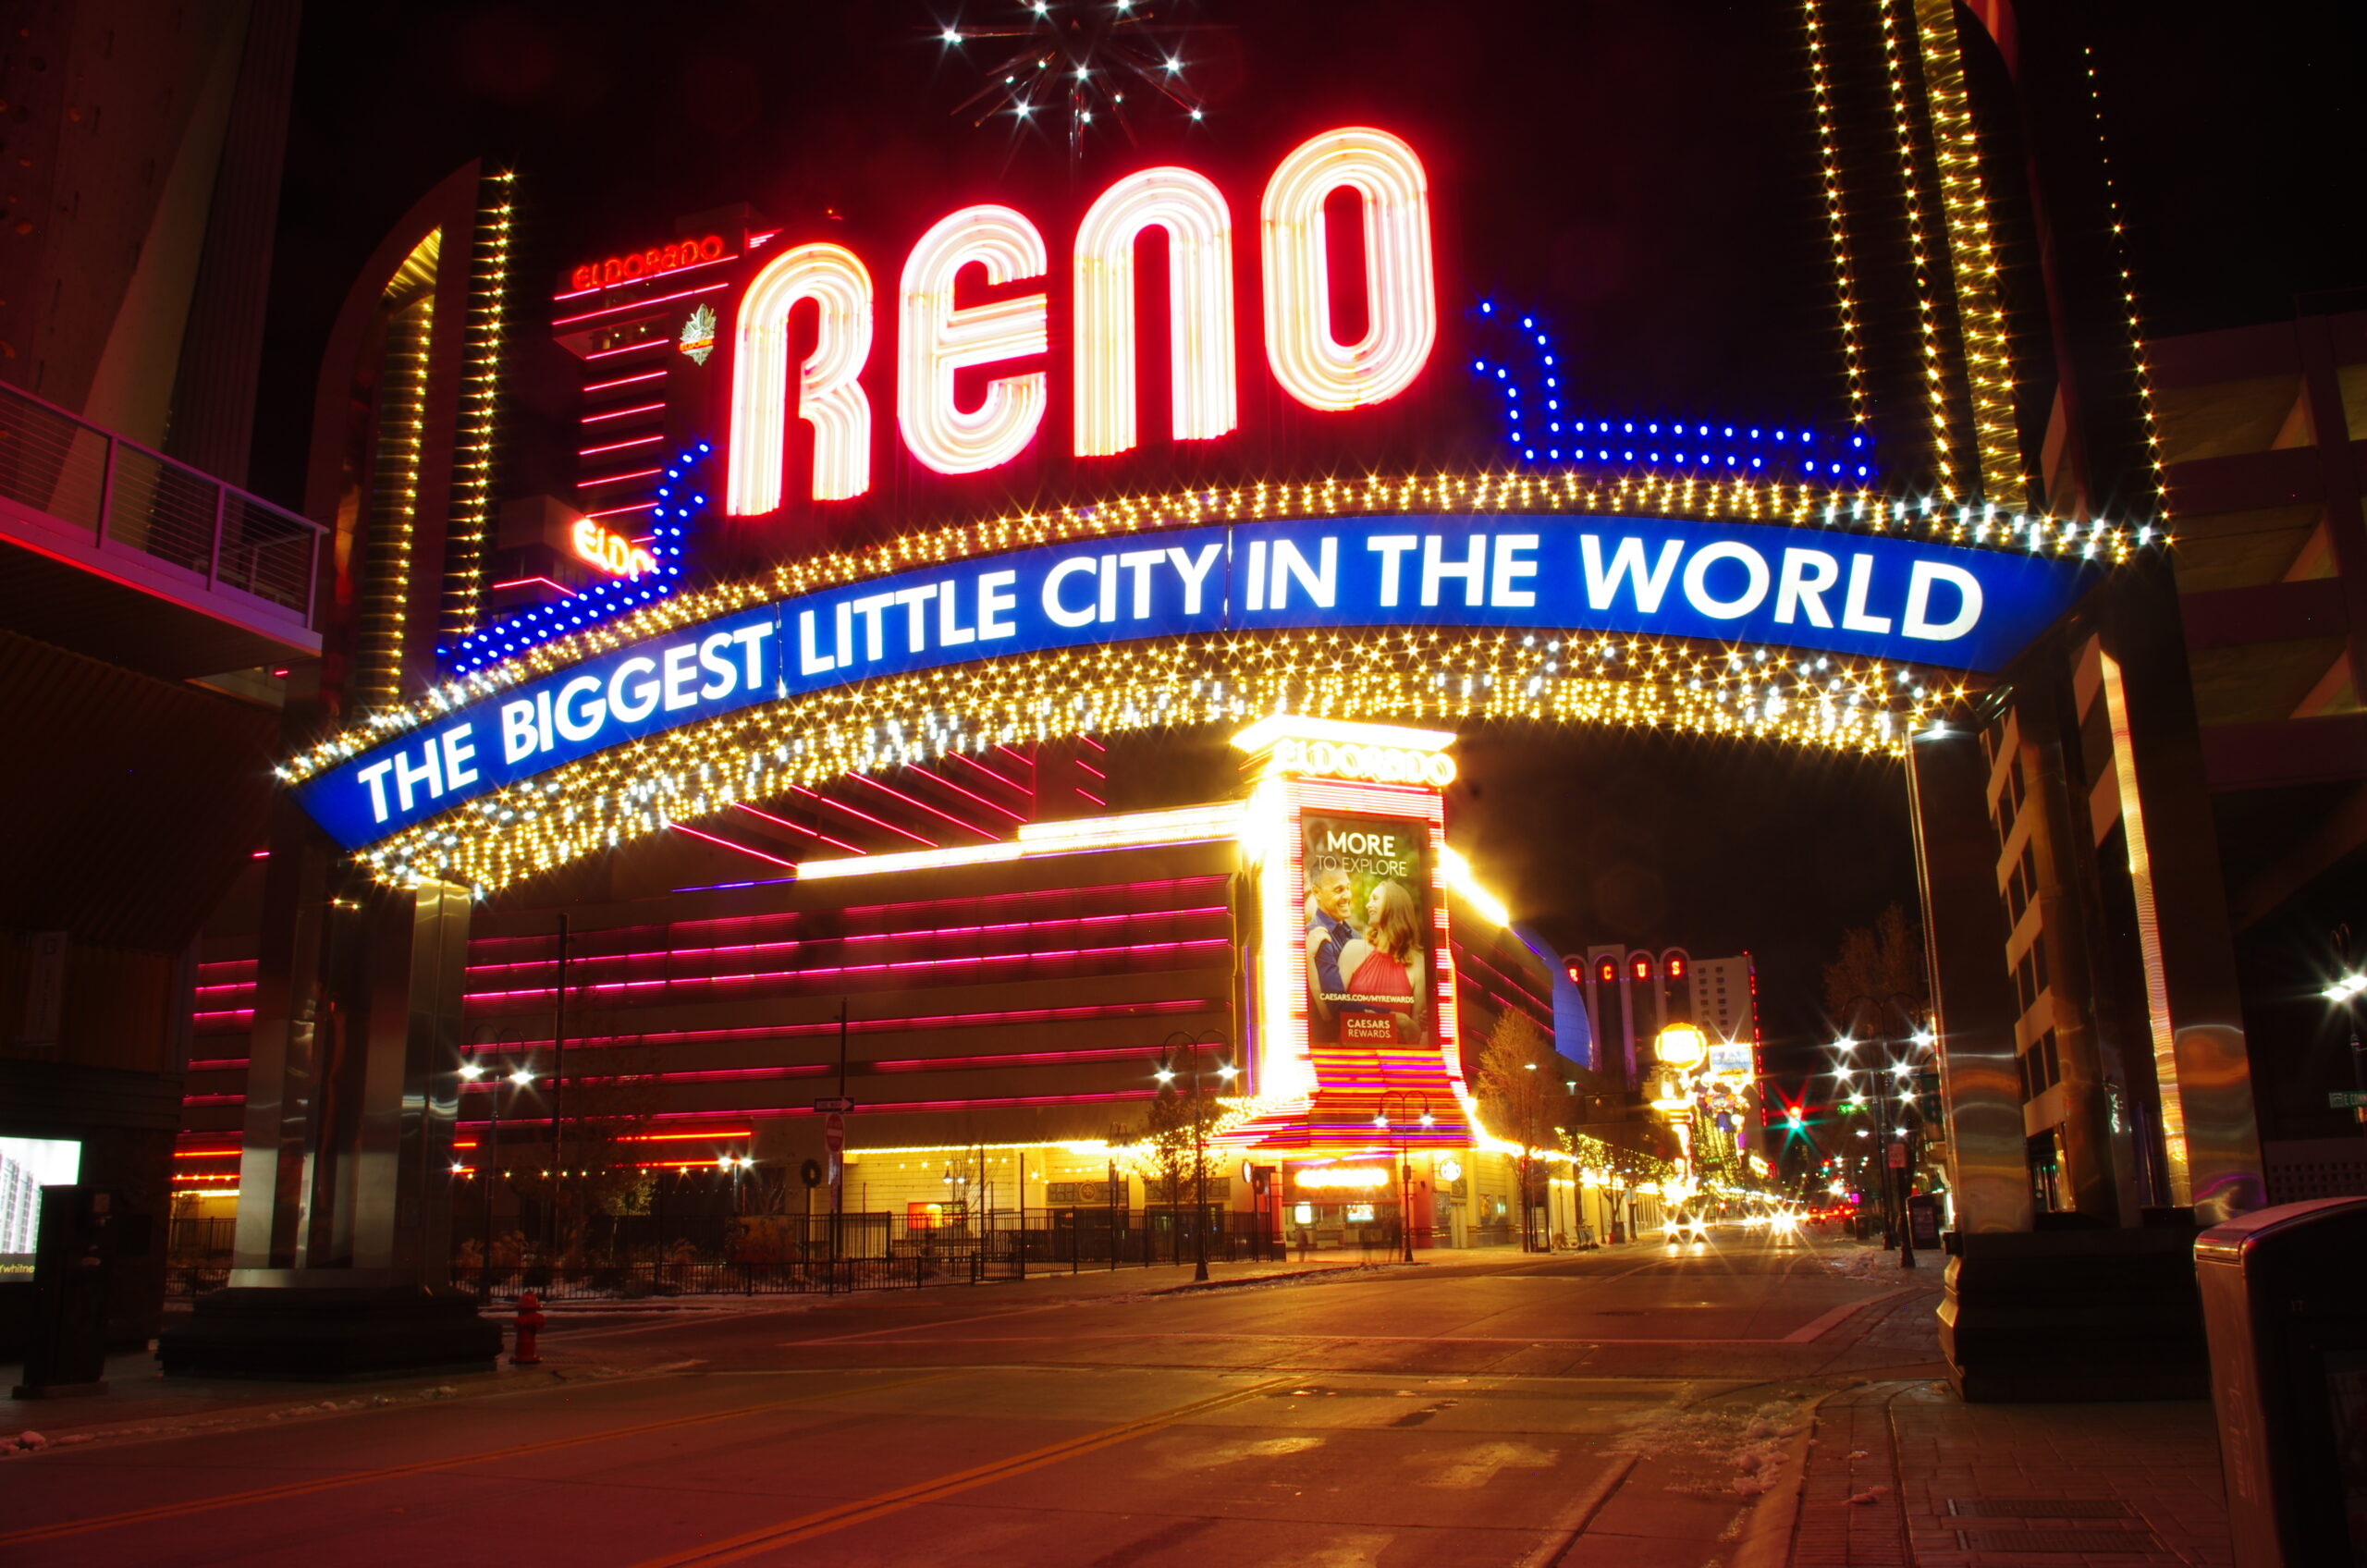 The iconic Reno Arch at night.